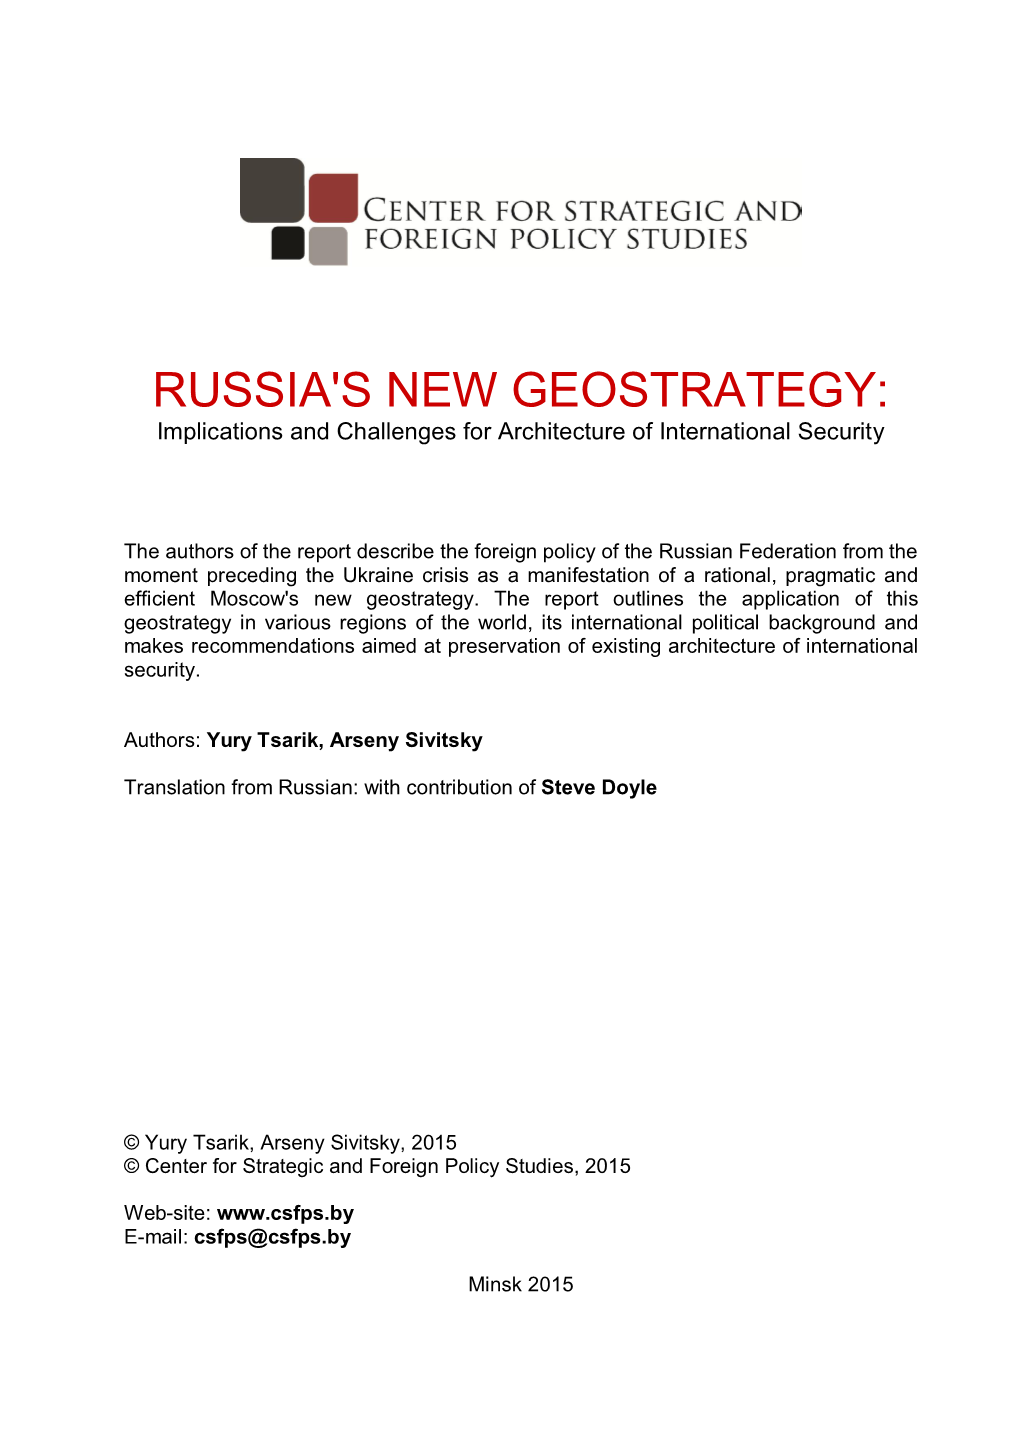 RUSSIA's NEW GEOSTRATEGY: Implications and Challenges for Architecture of International Security